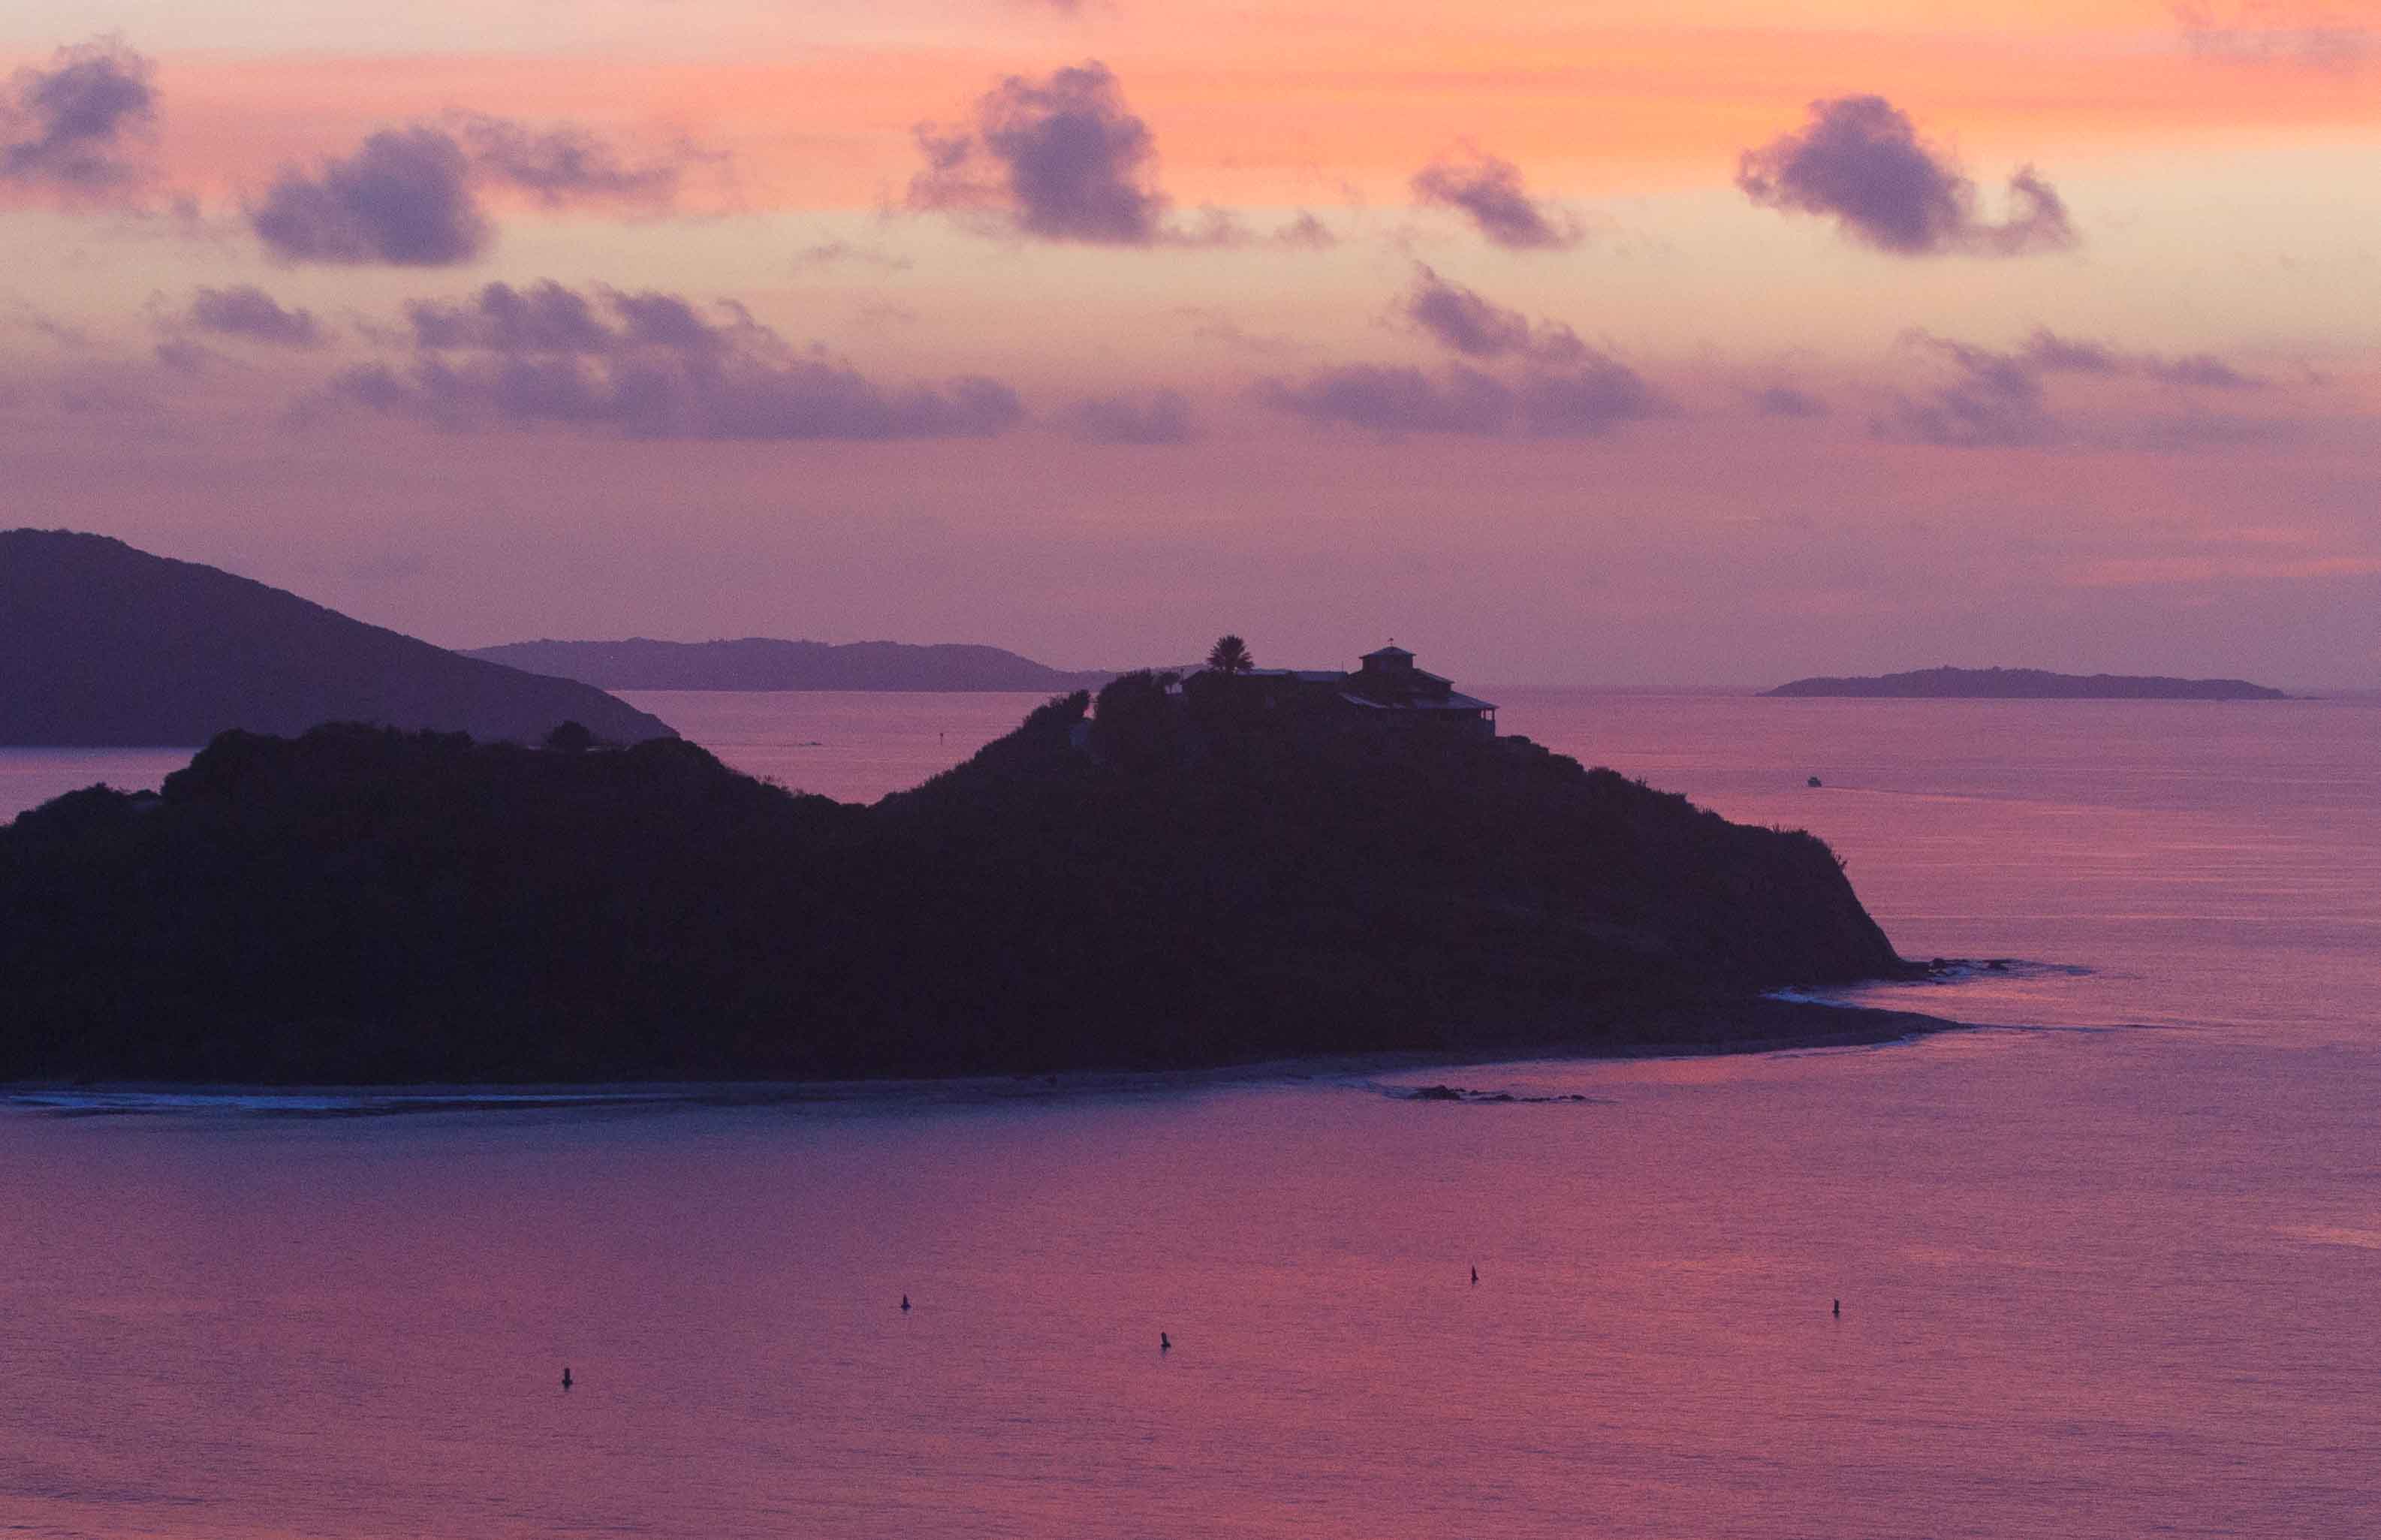 Dawn's early light casts a purple glow over the sea surrounds Buck Island just off the coast of Tortola in the British Virgin Islands - Beef Island, Virgin Gorda and Ginger Island in the background